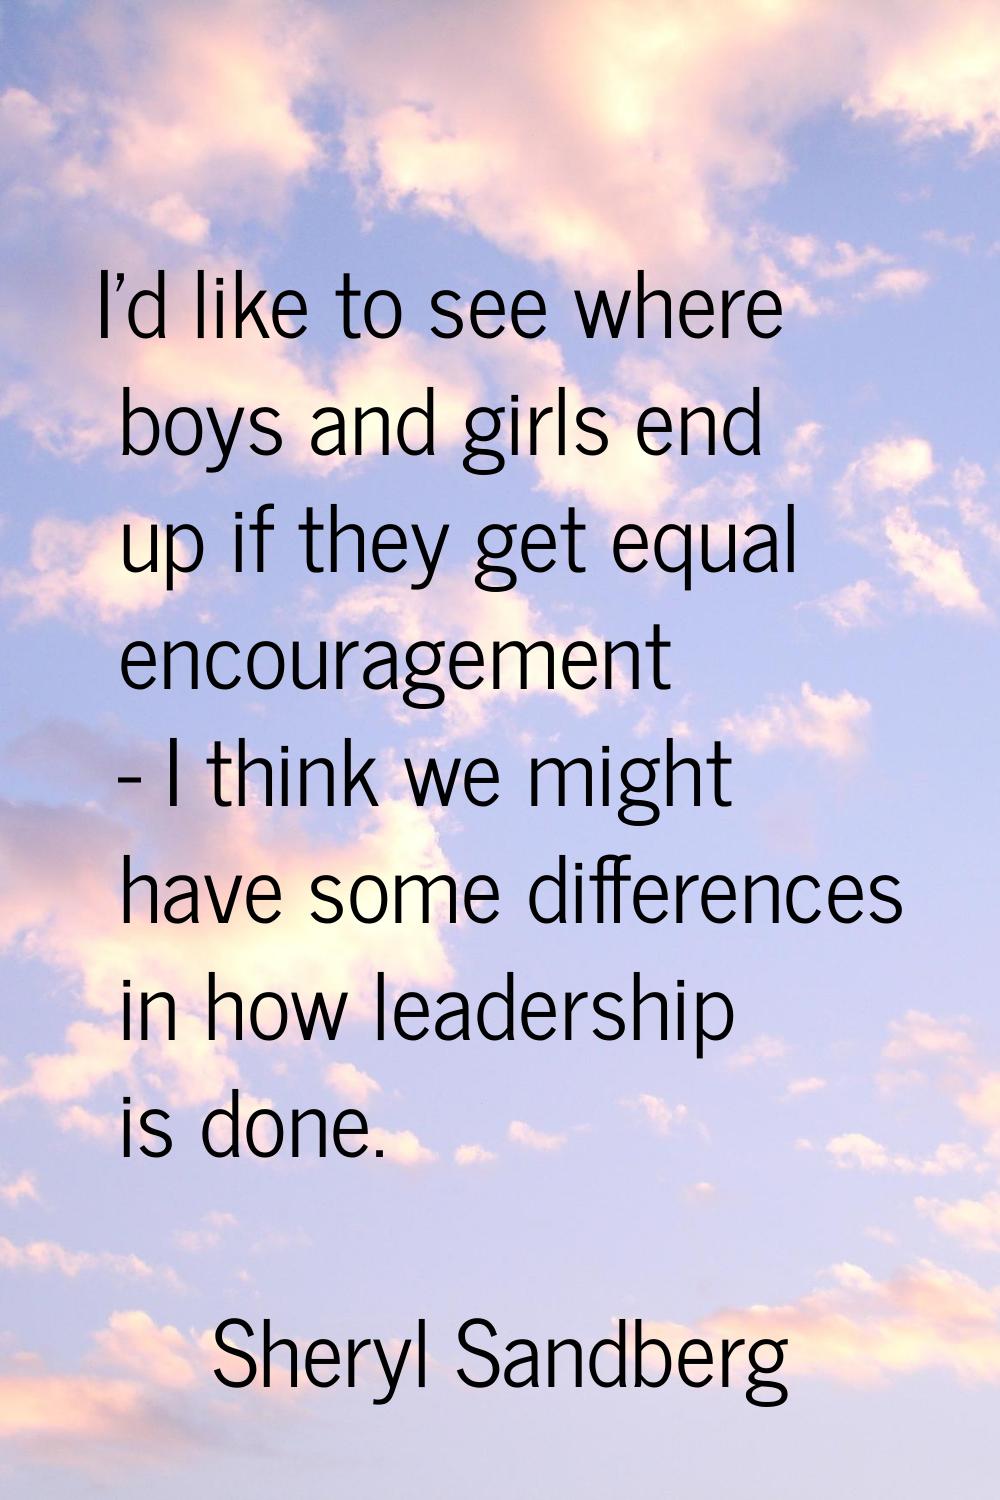 I'd like to see where boys and girls end up if they get equal encouragement - I think we might have